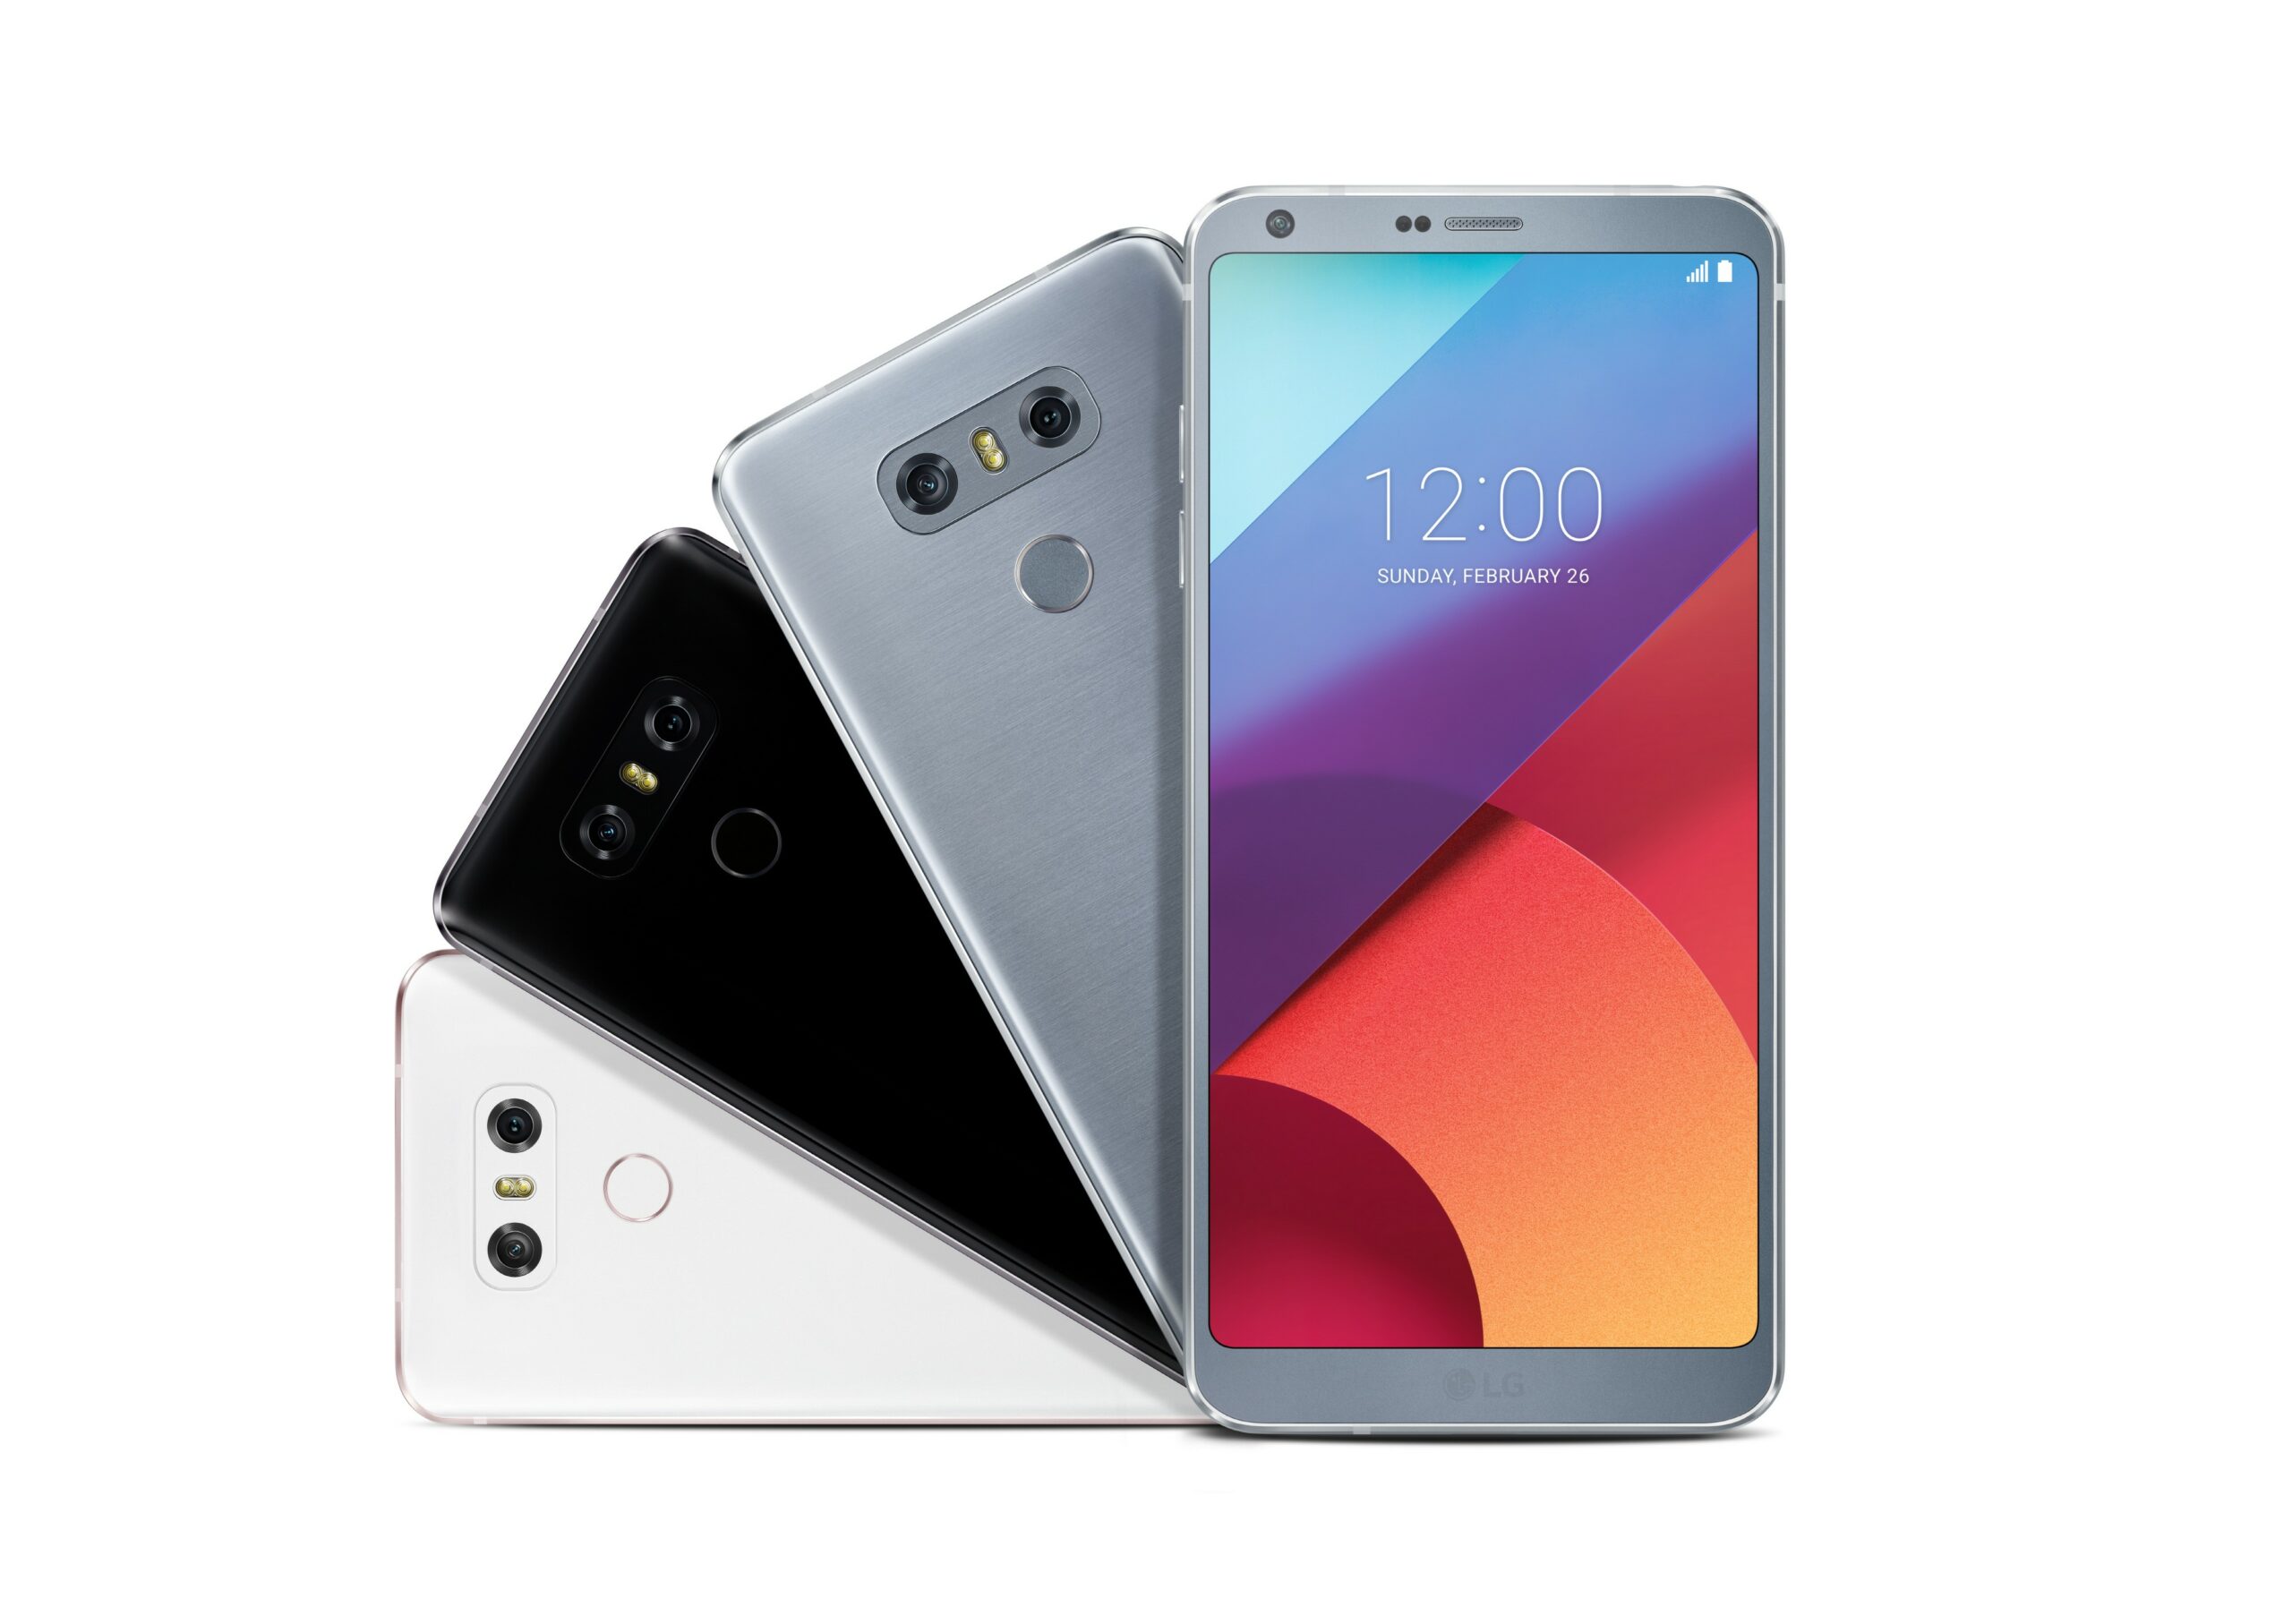 LG G6 likely to support facial recognition by June: Report